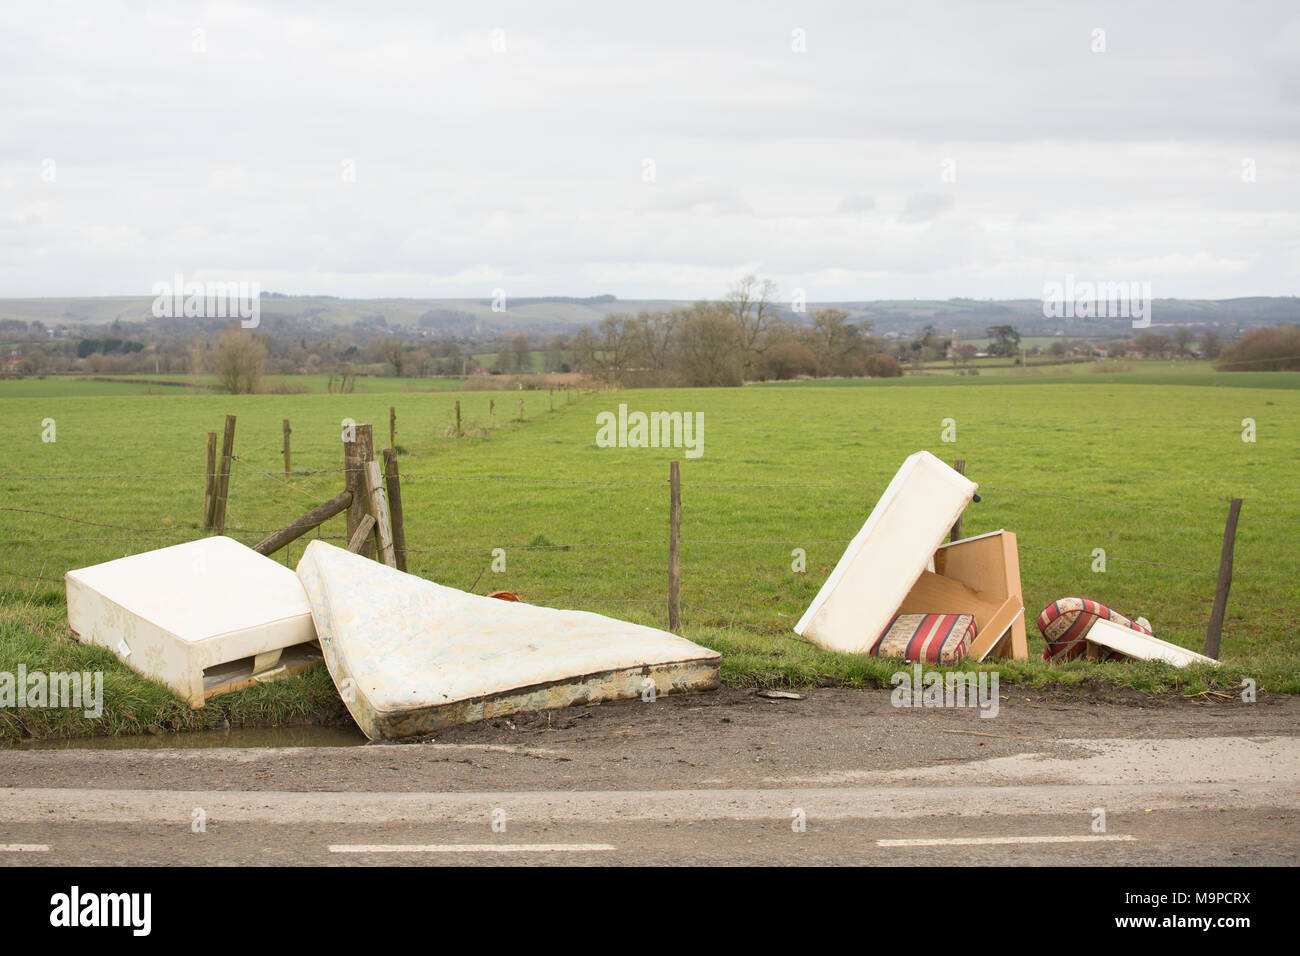 Mattresses and furniture dumped  in a lay-by near Gillingham, Dorset England UK GB Stock Photo